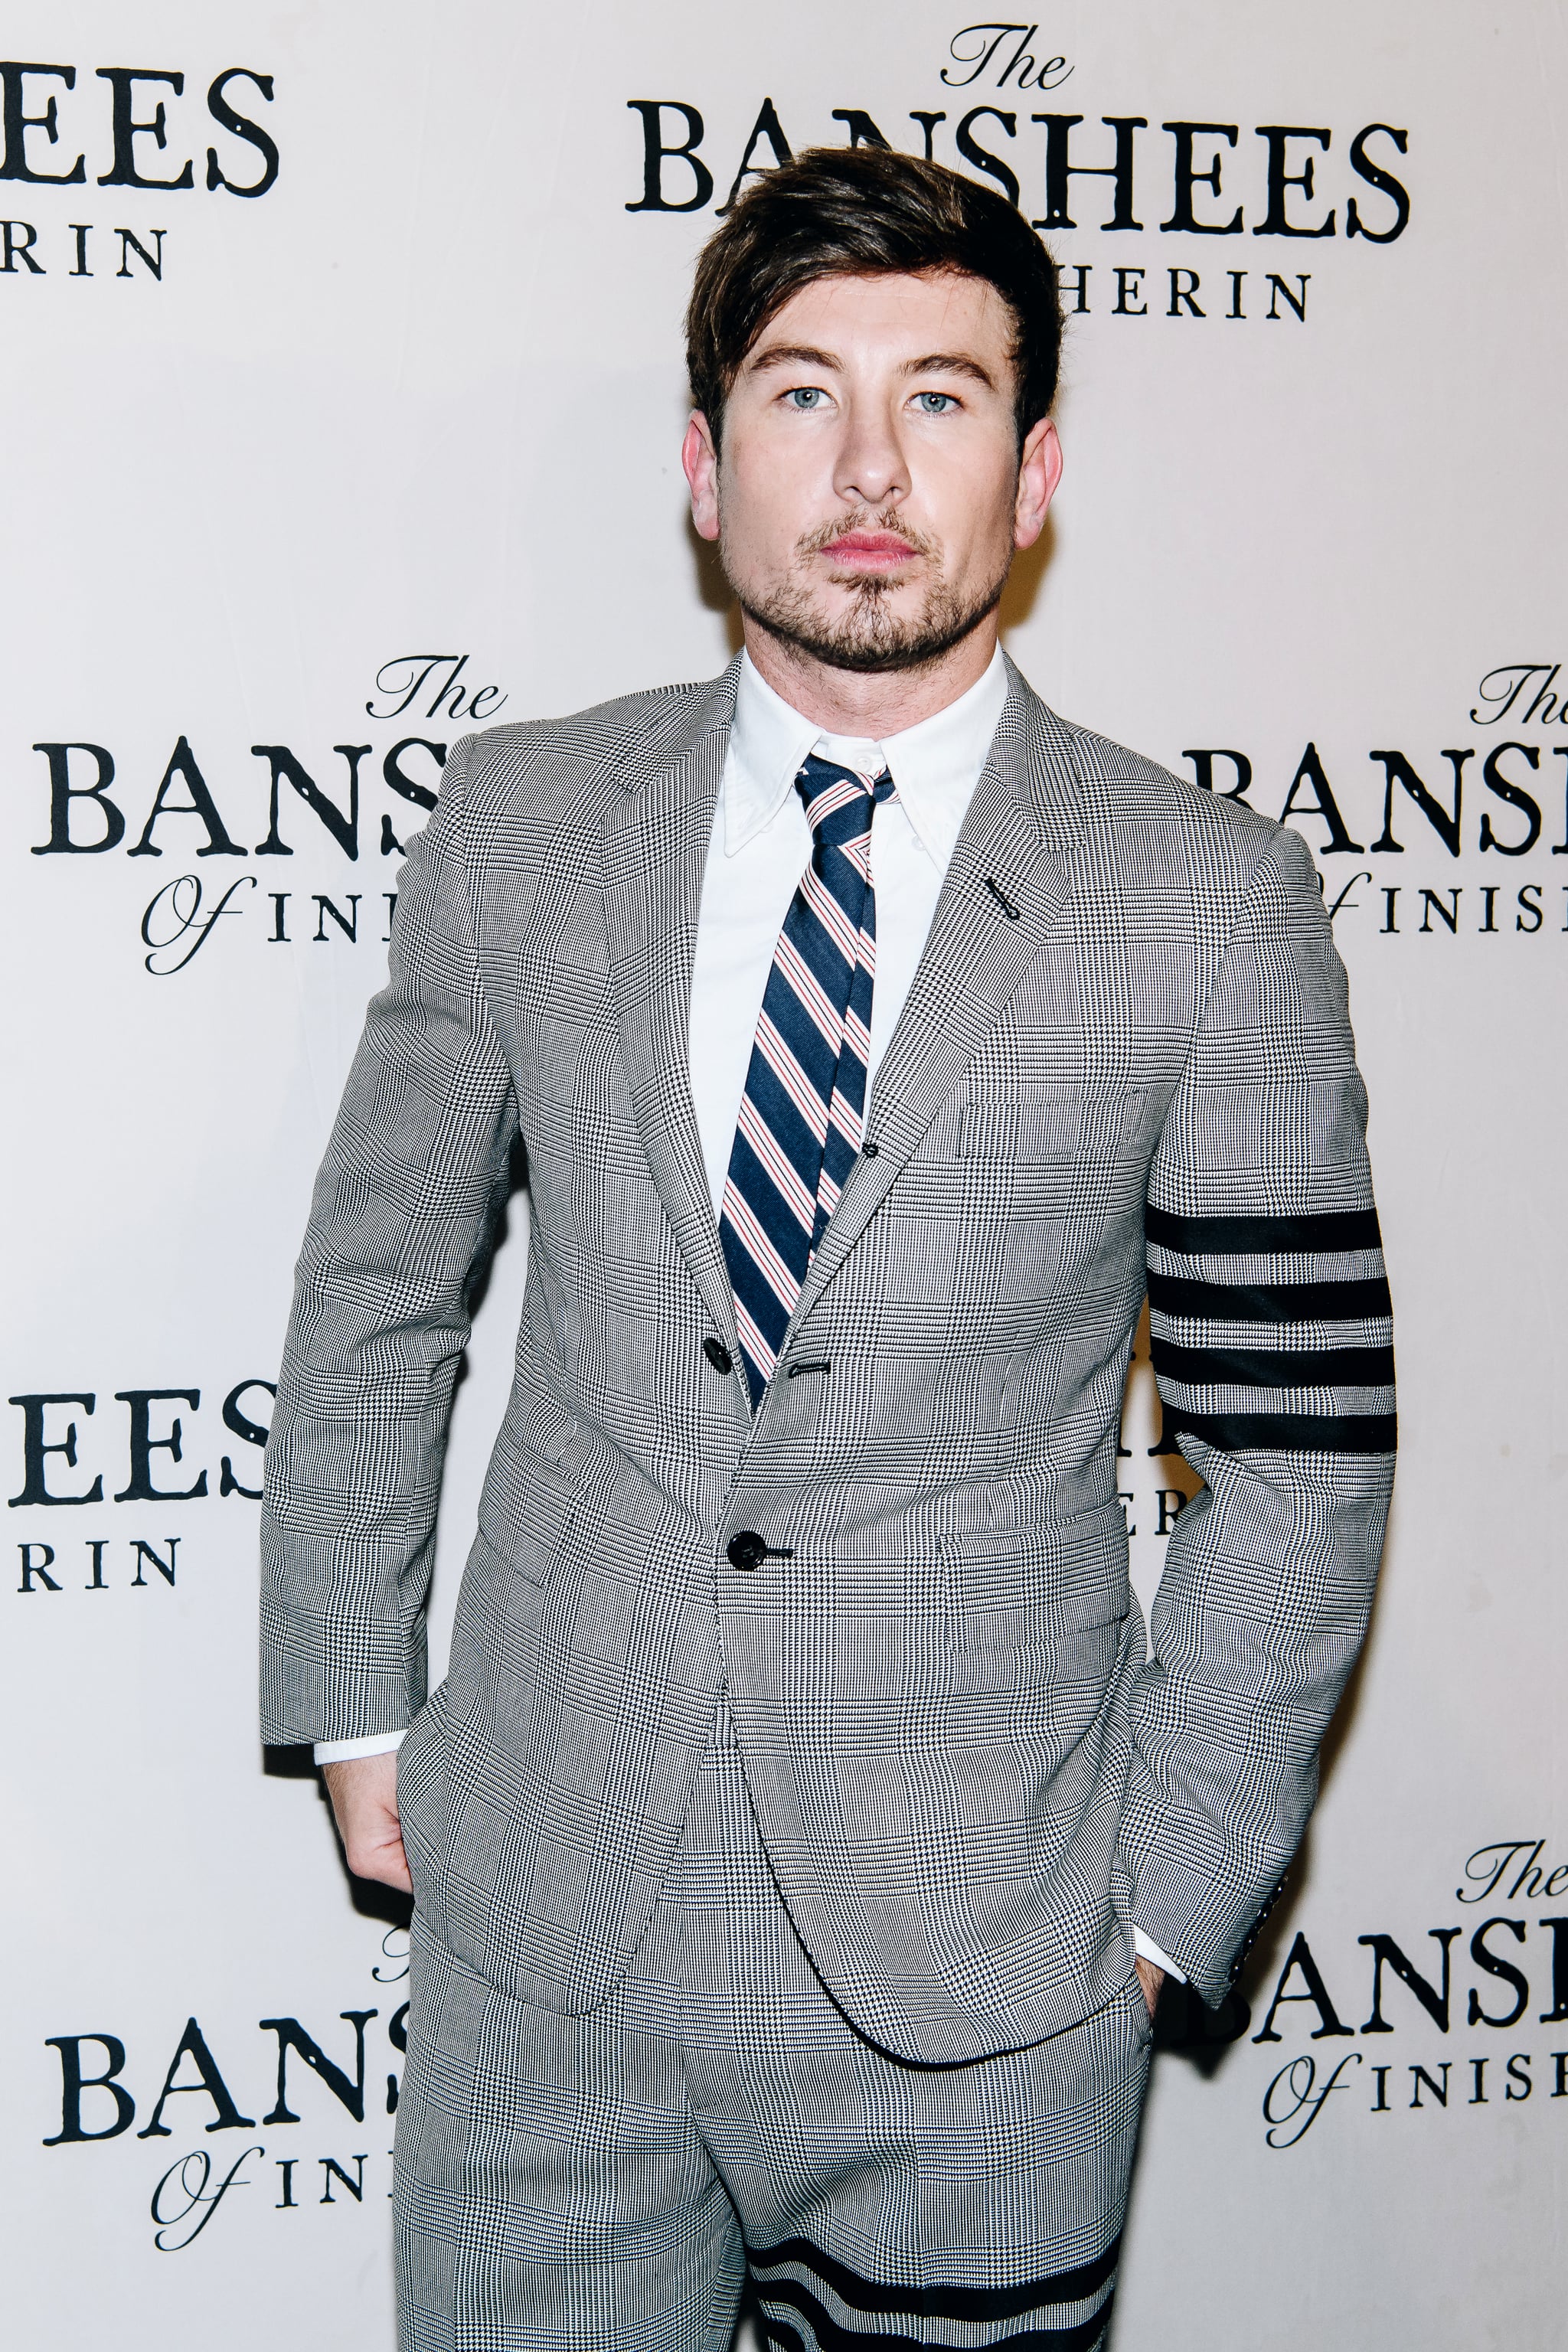 Barry Keoghan at the Banshees of Inisherin premiere